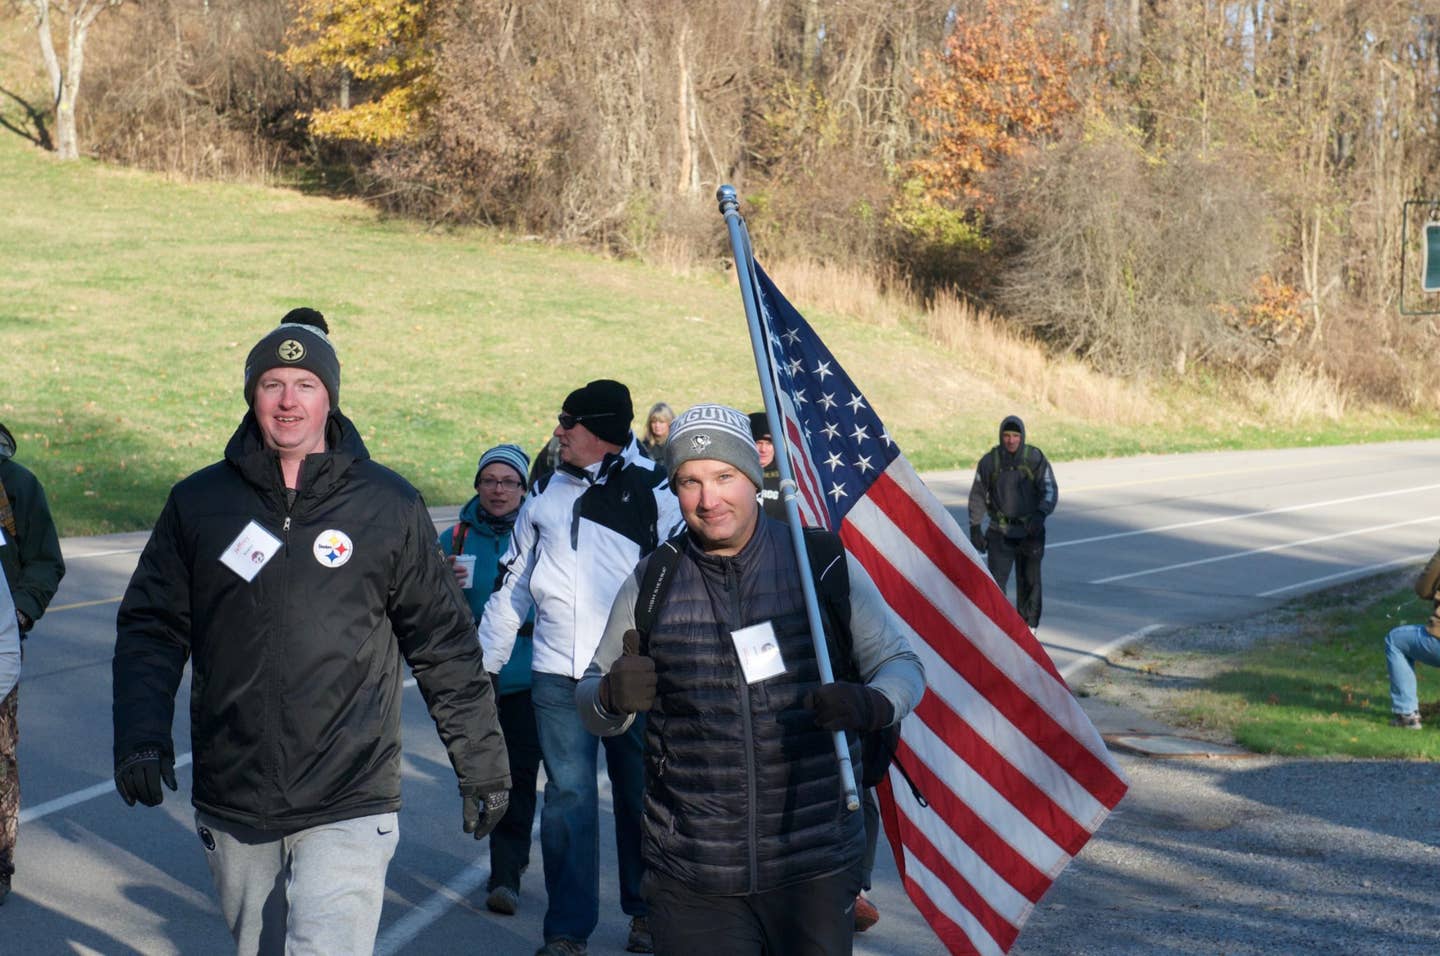 Bryan Watson, secretary for the Defenders of Freedom Pittsburgh, a nonprofit organization out of Pittsburgh, Pennsylvania, carries the American flag and leads volunteers during the 2nd Annual Stop 22 Ruck March, at North Park in Allison Park, Pennsylvania on November 11, 2017. The ruck march is held on Veterans Day to raise awareness about veteran suicide. (U.S. Army Photo by Spc. Miguel Alvarez, 354th Mobile Public Affairs Detachment)